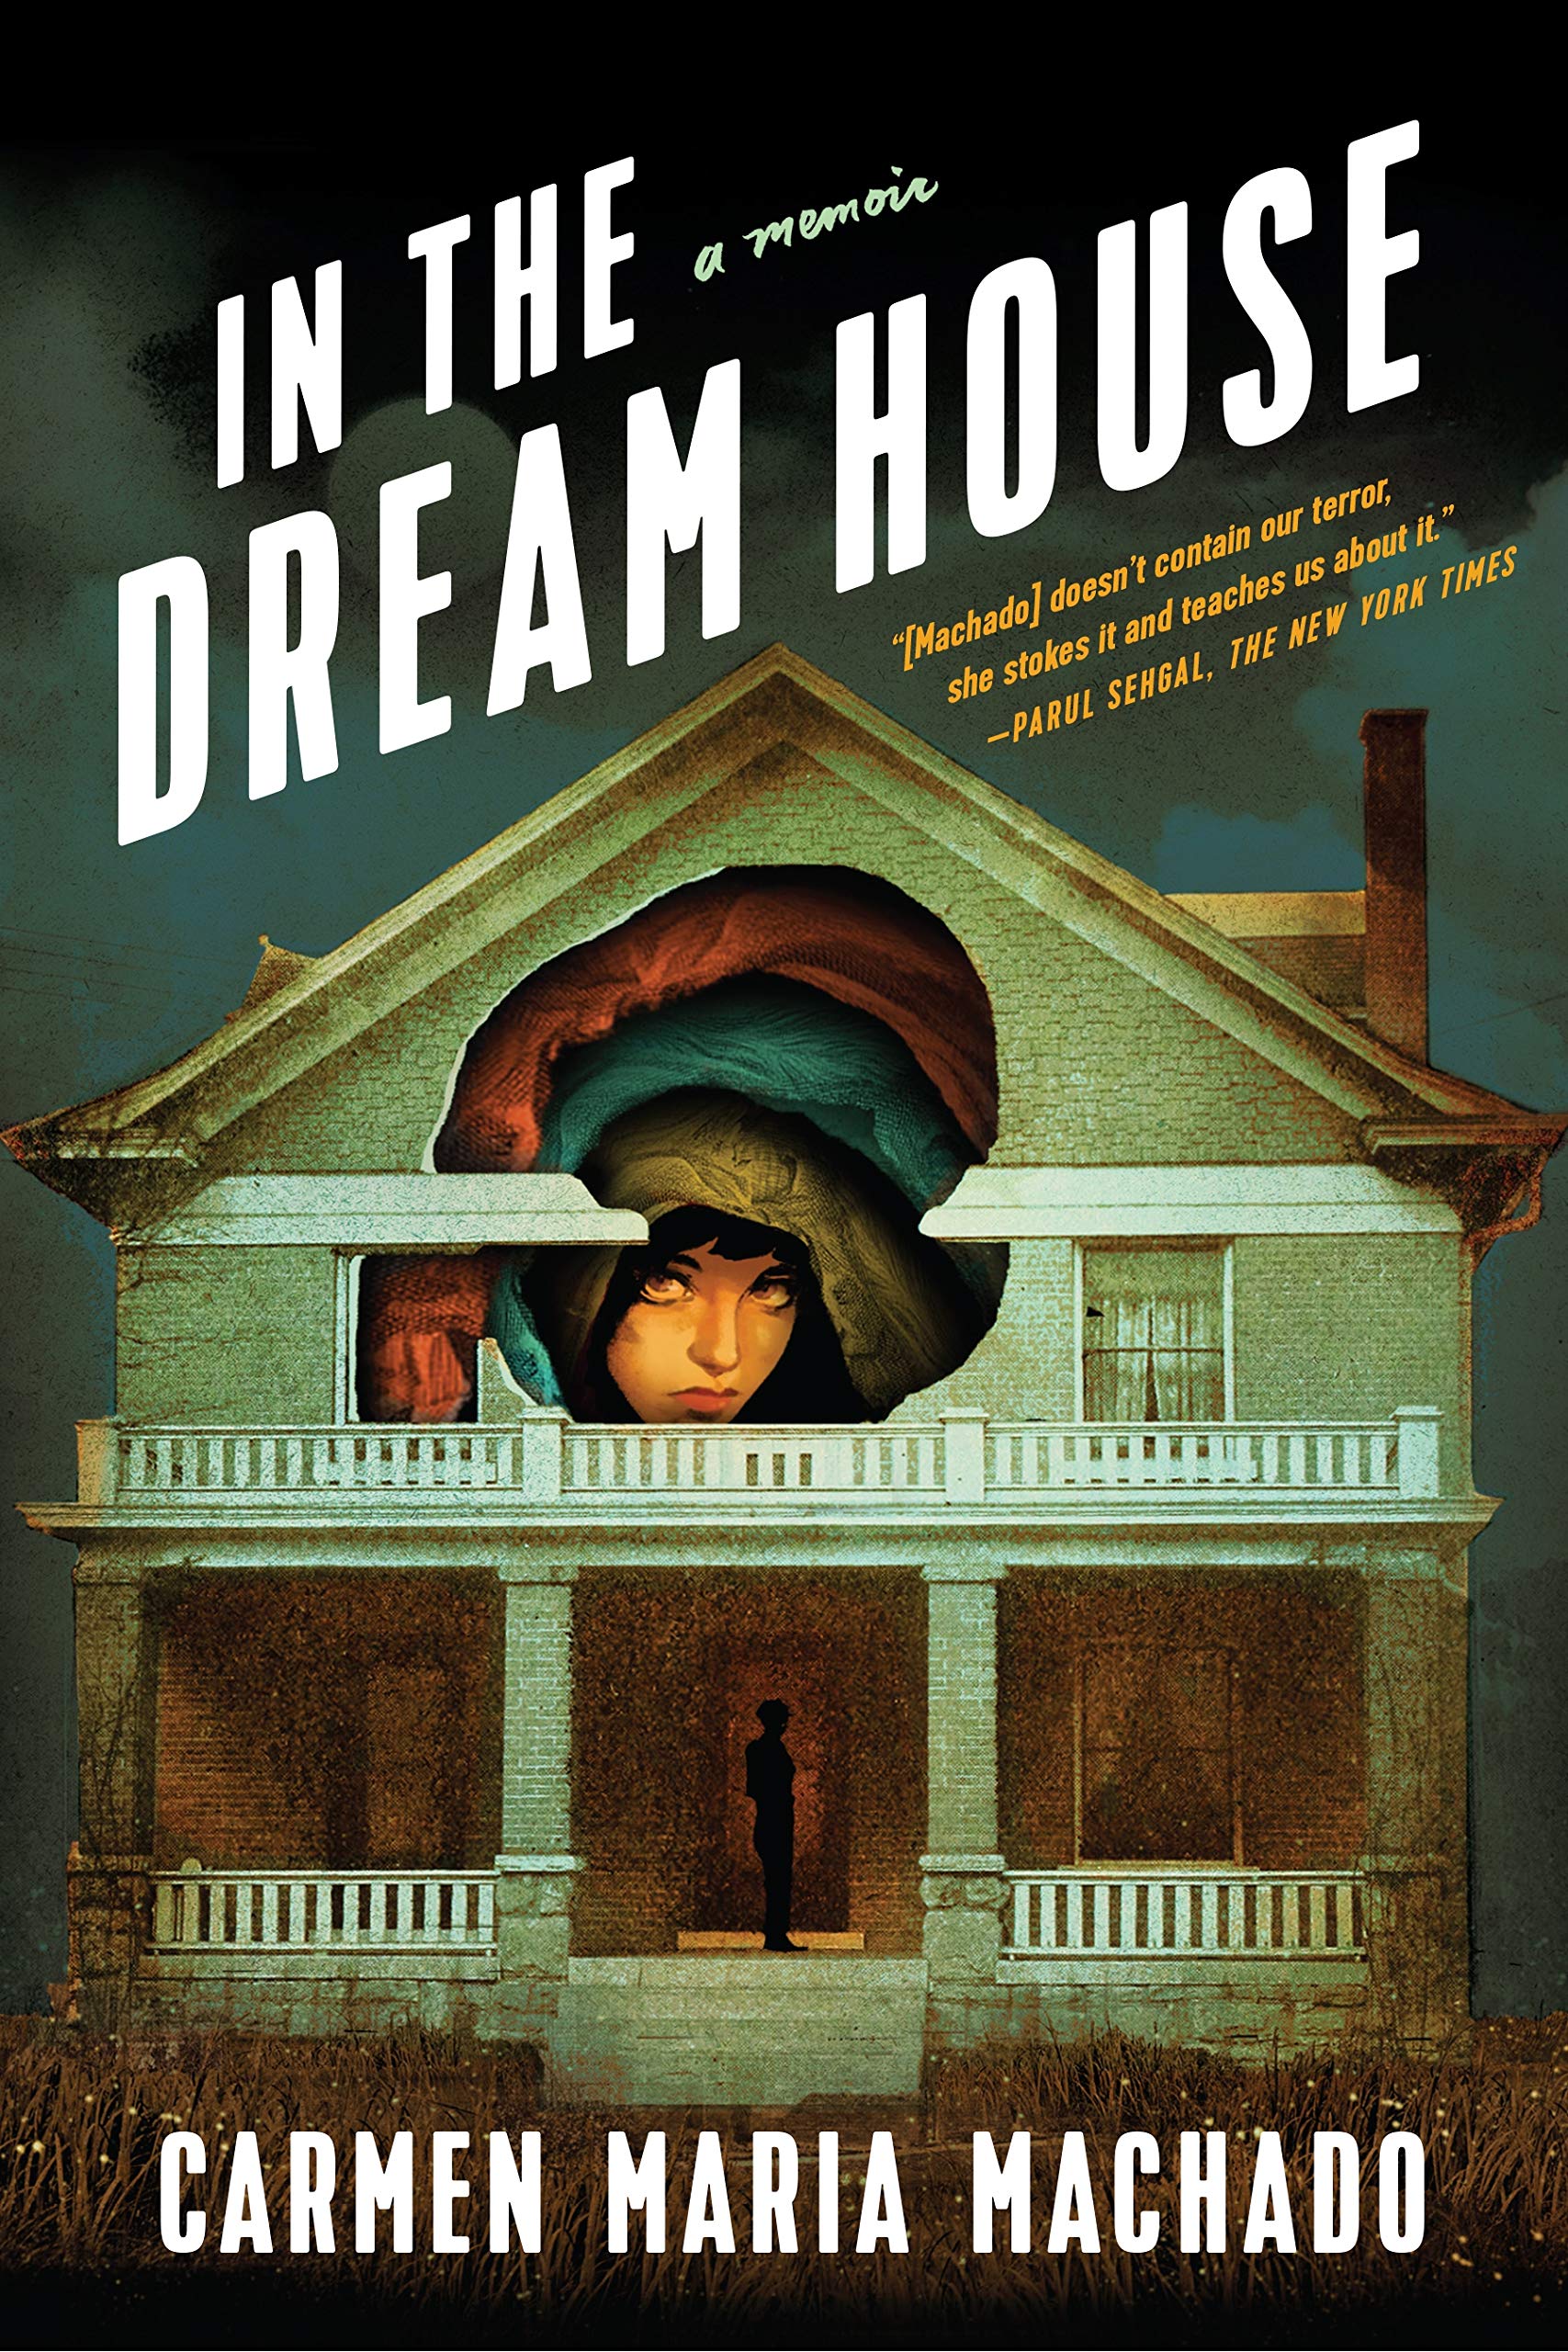 image of in the dream house book cover